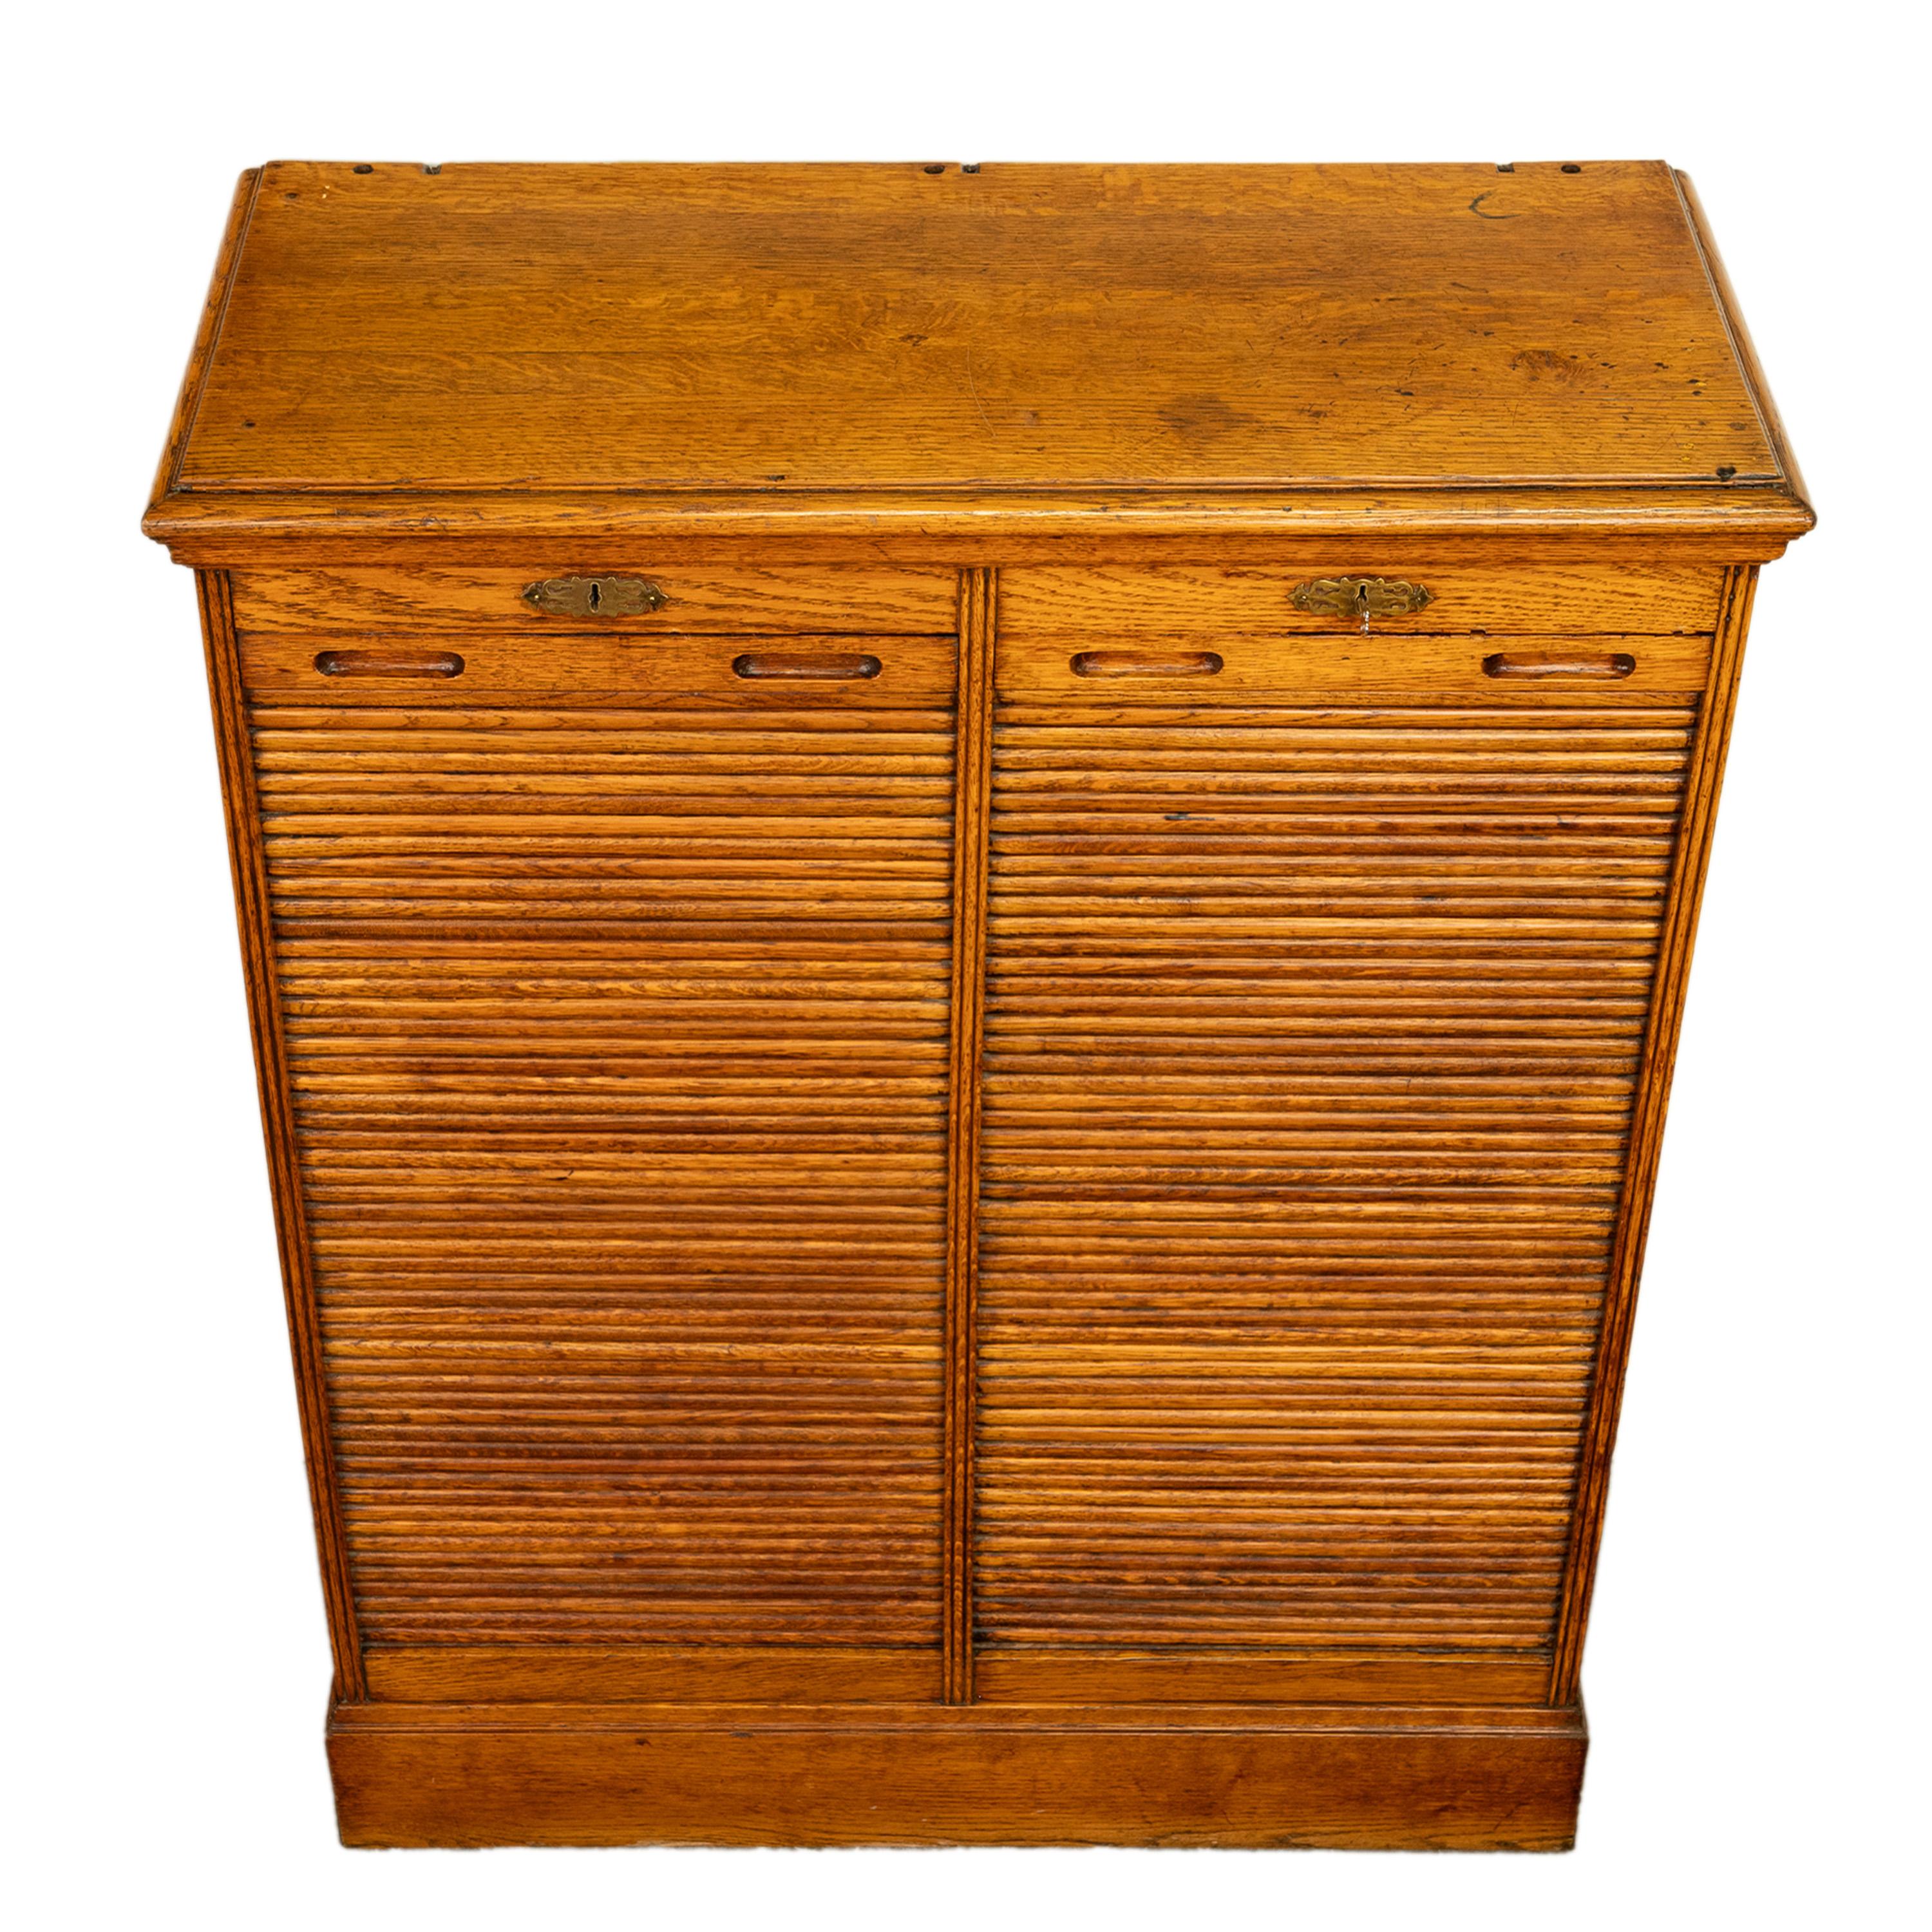 American Craftsman Antique American Oak Double Tambour Roll Top 16 Drawer Filing Cabinet 1910 For Sale